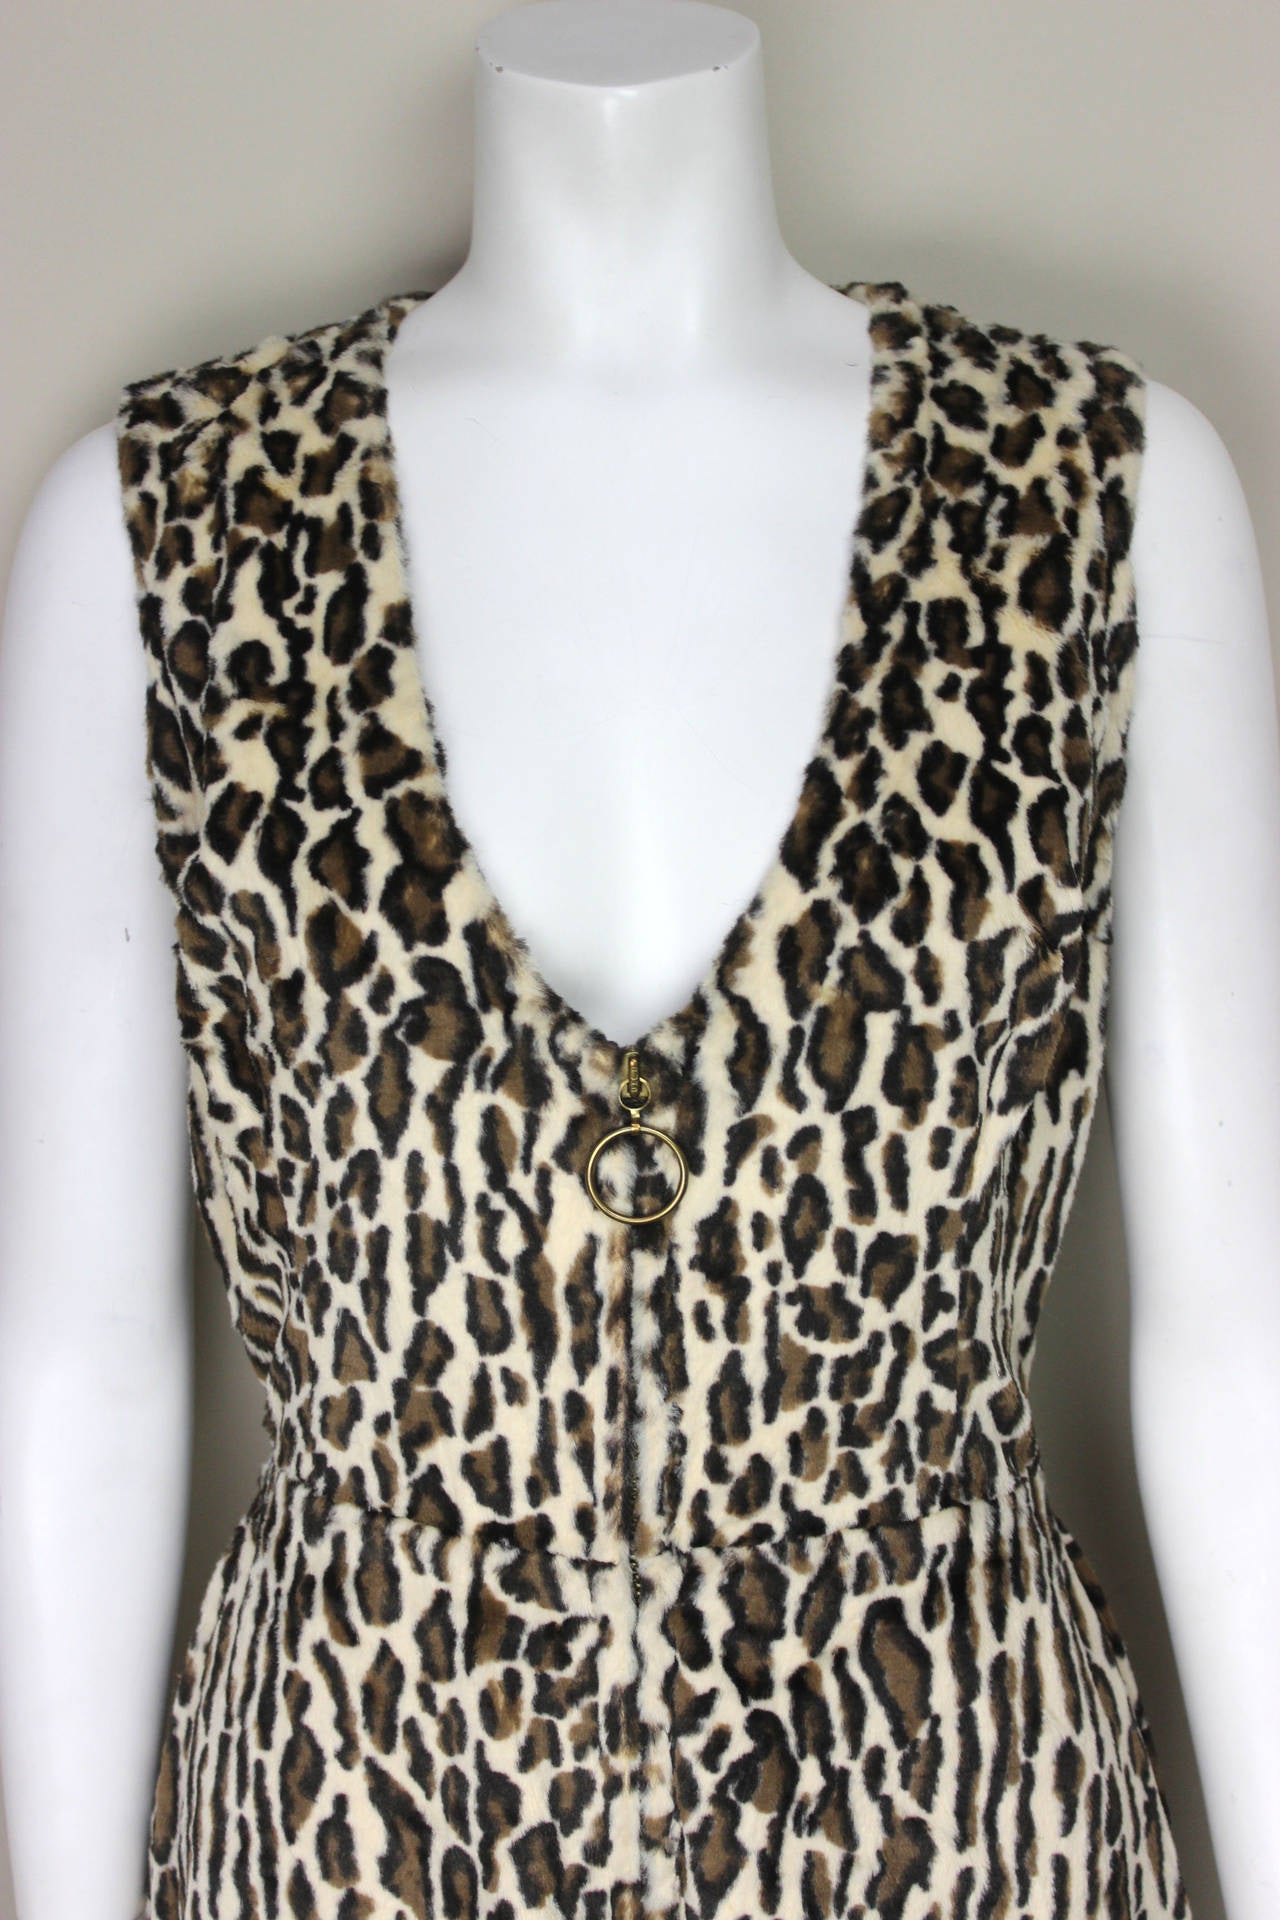 This jumpsuit has quintessential 1970s design elements: an elongated
zipper front with a large ring pull, a super wide bell bottom and a
faux fur leopard print. This sexy 1970s look is perfect!